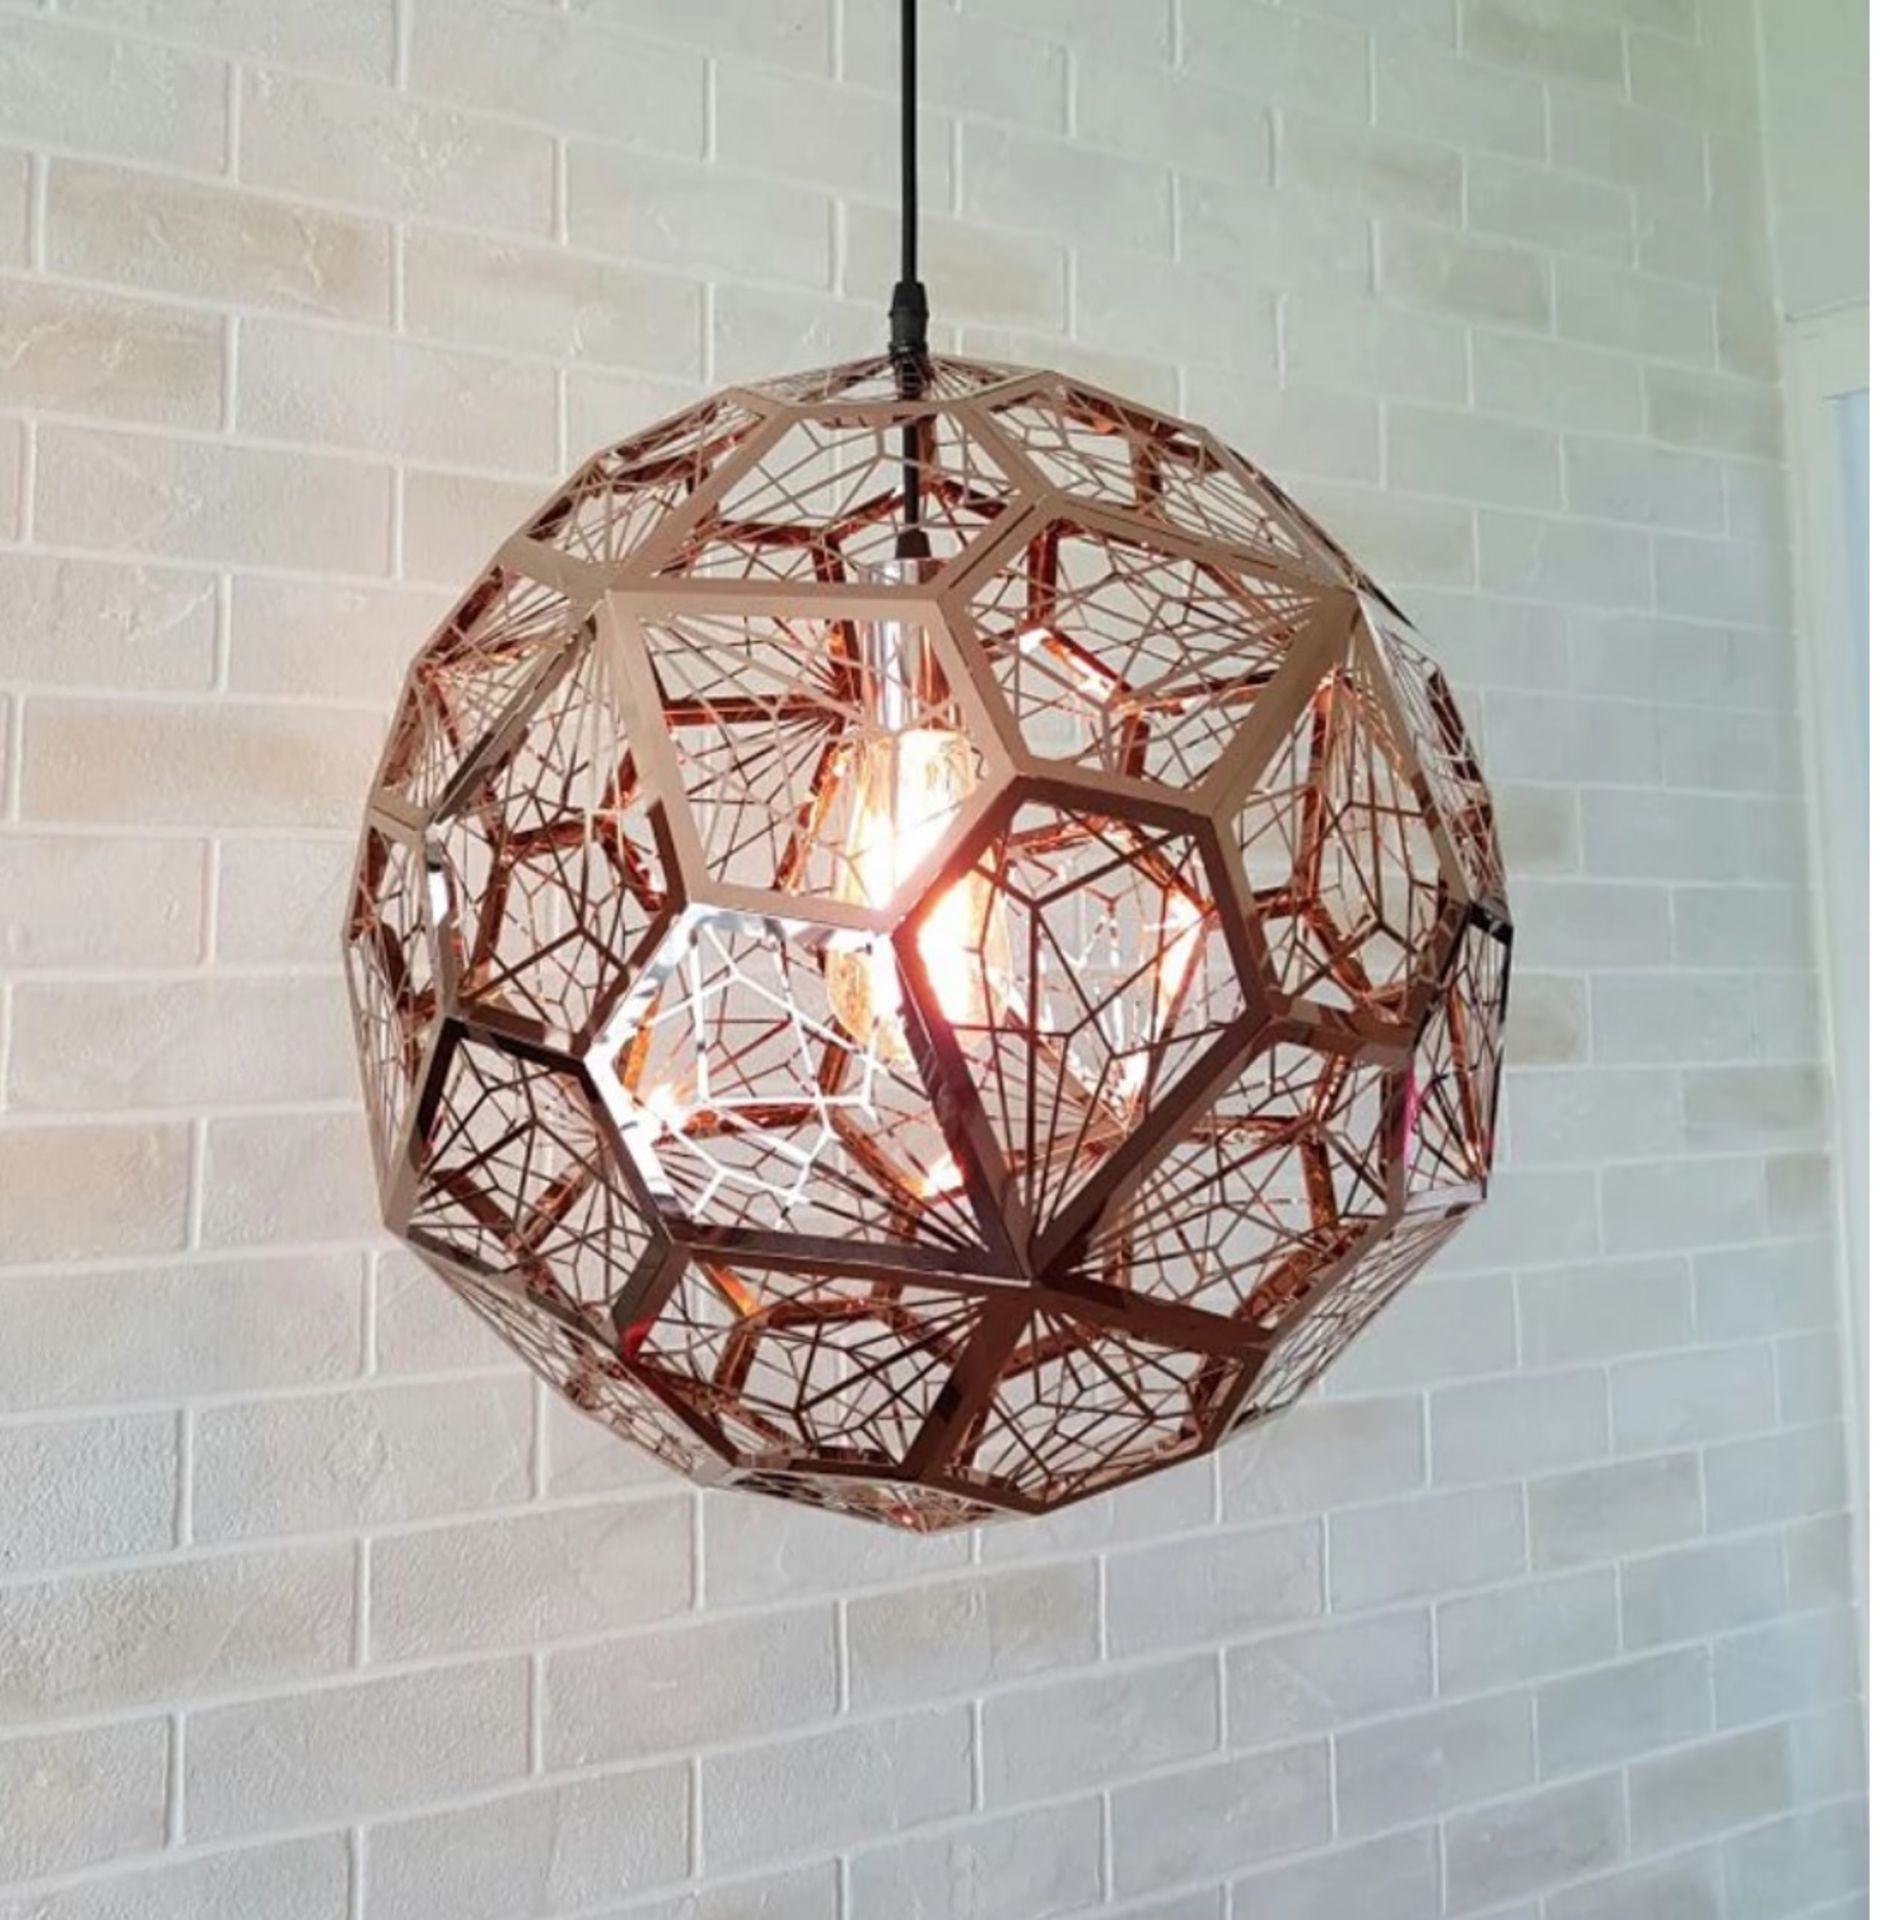 Rango 32cm Gold Pendant Light Inspired by the logic of mathematics, the shade is composed of many